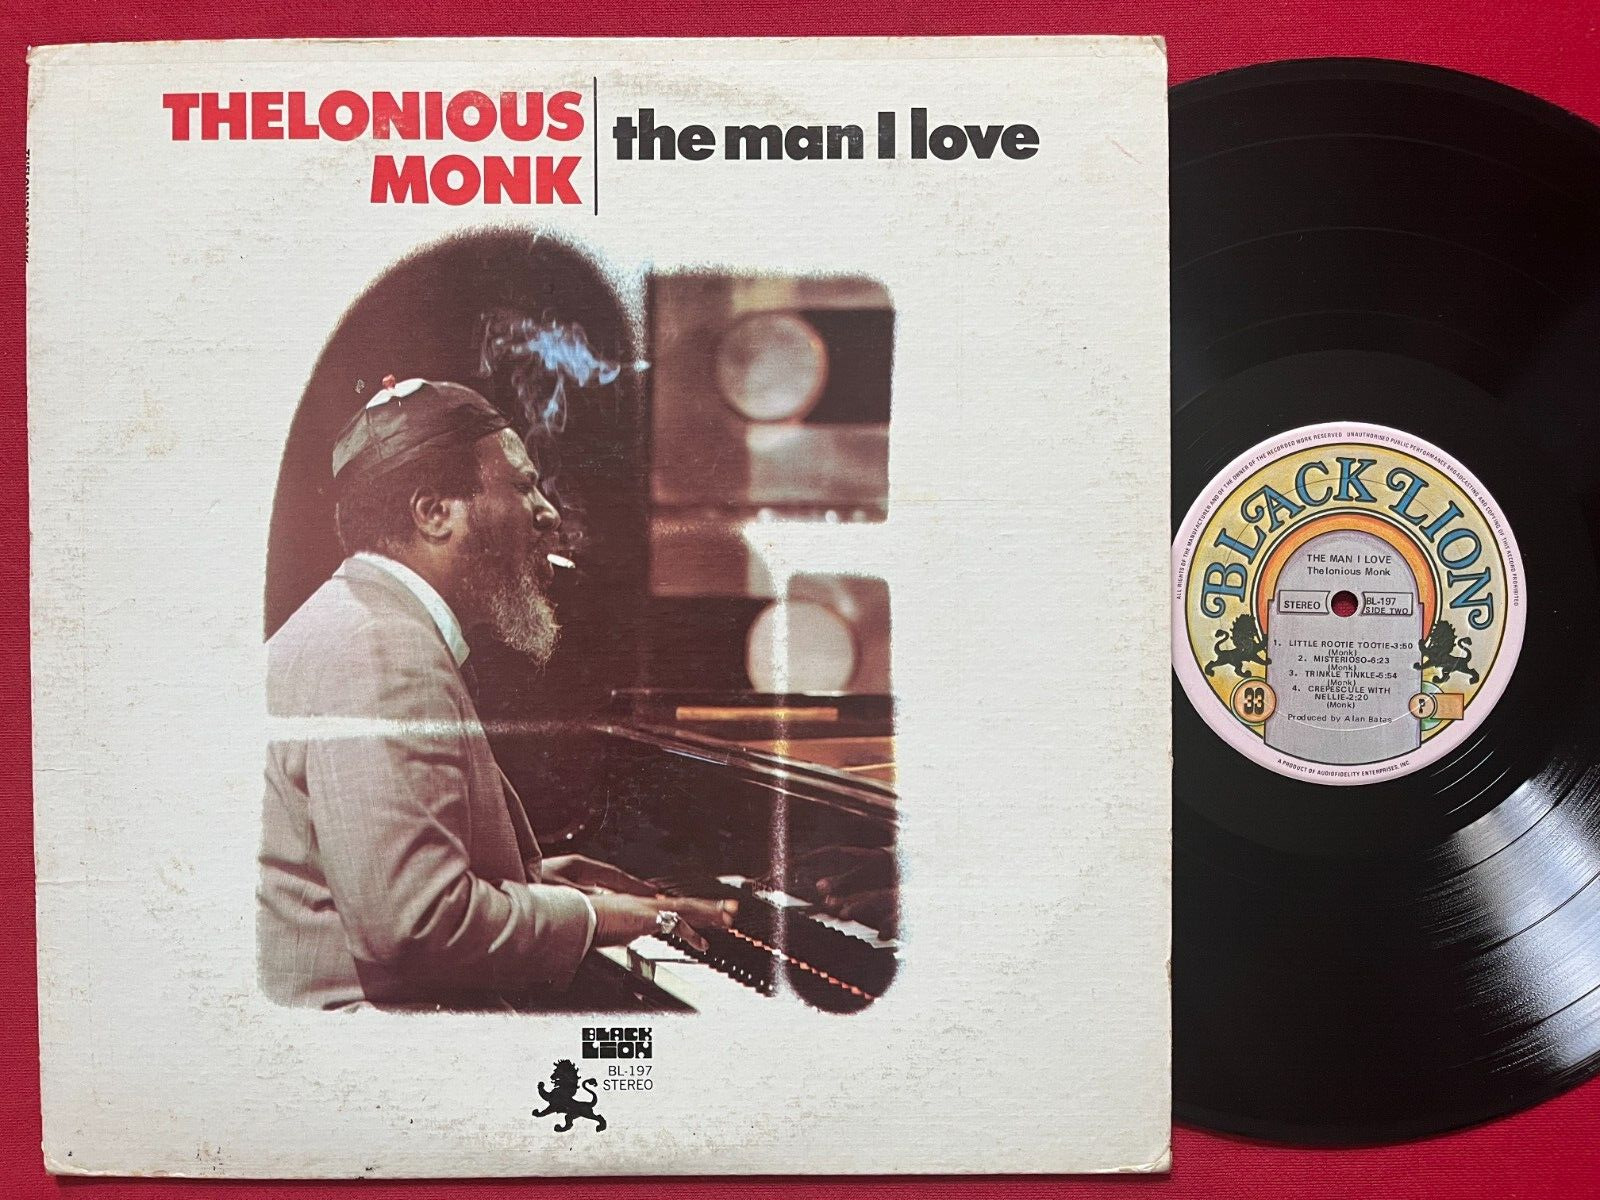 THELONIOUS MONK~THE MAN I LOVE LP (1973) BLACK LION BL-297 STEREO JAZZ